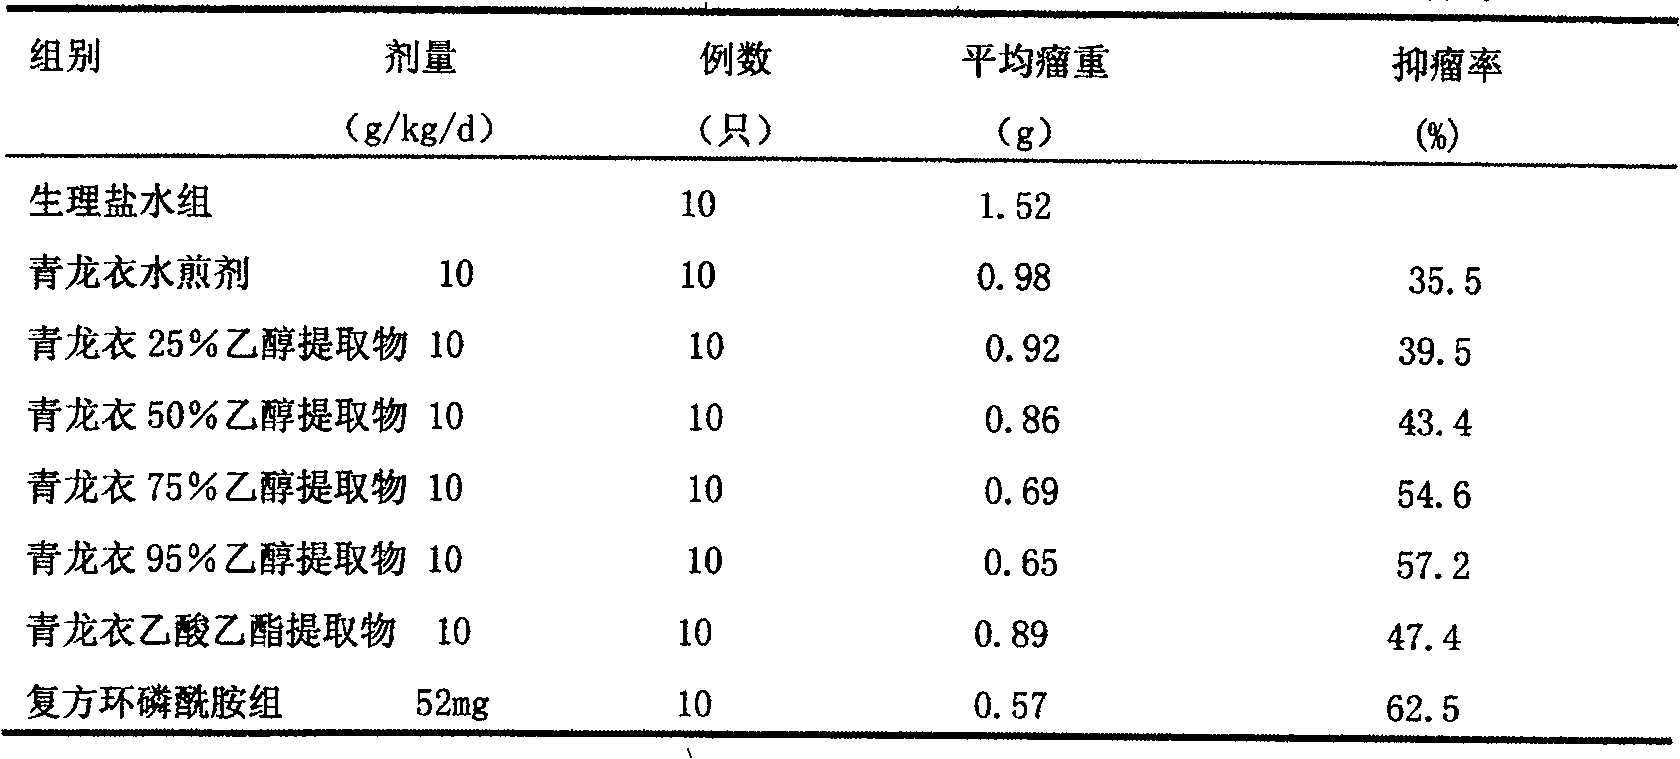 Composition of Chinese traditional medicine for treating tumor, and preparation method